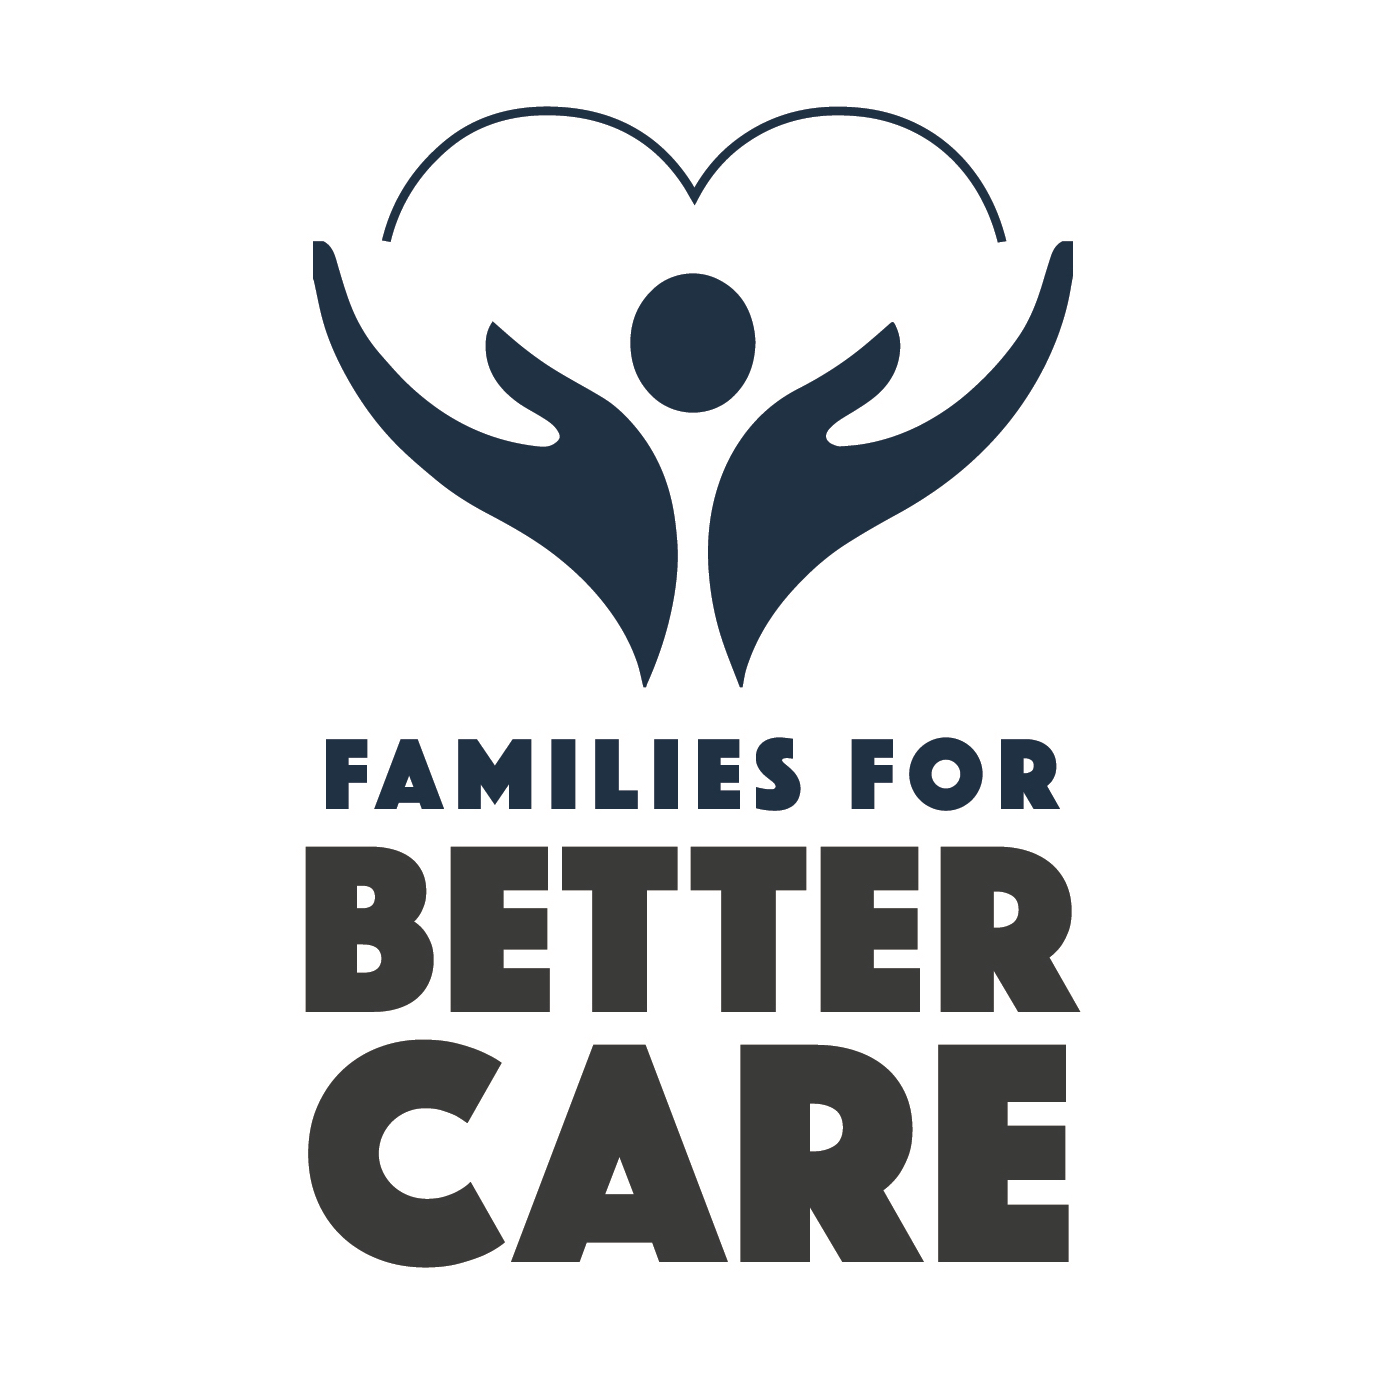 Brian Lee Stimulus Payment Families for Better Care Image